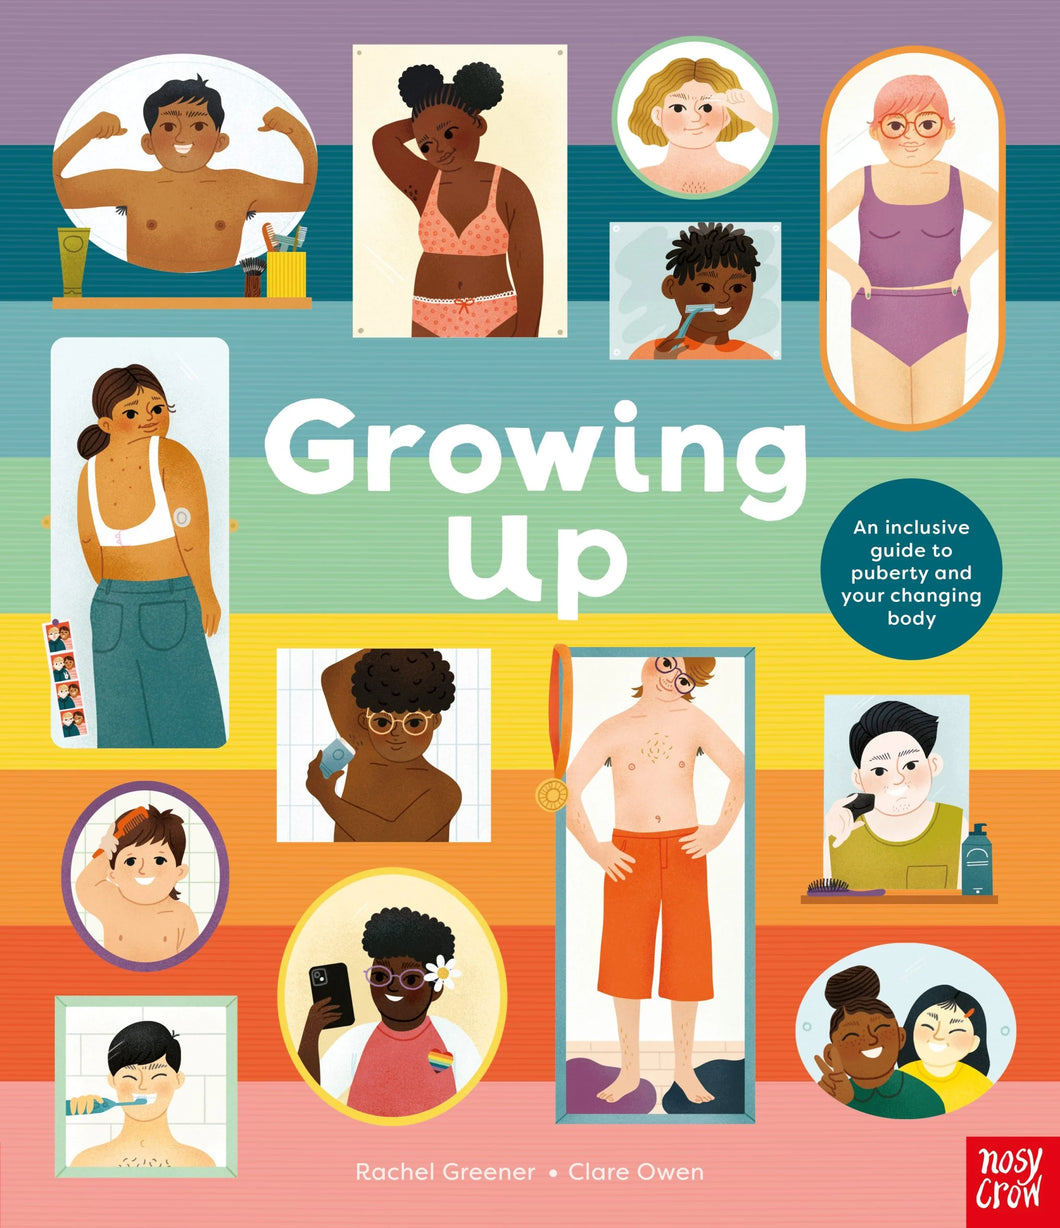 Growing Up: An Inclusive Guide to Puberty and Your Changing Body!